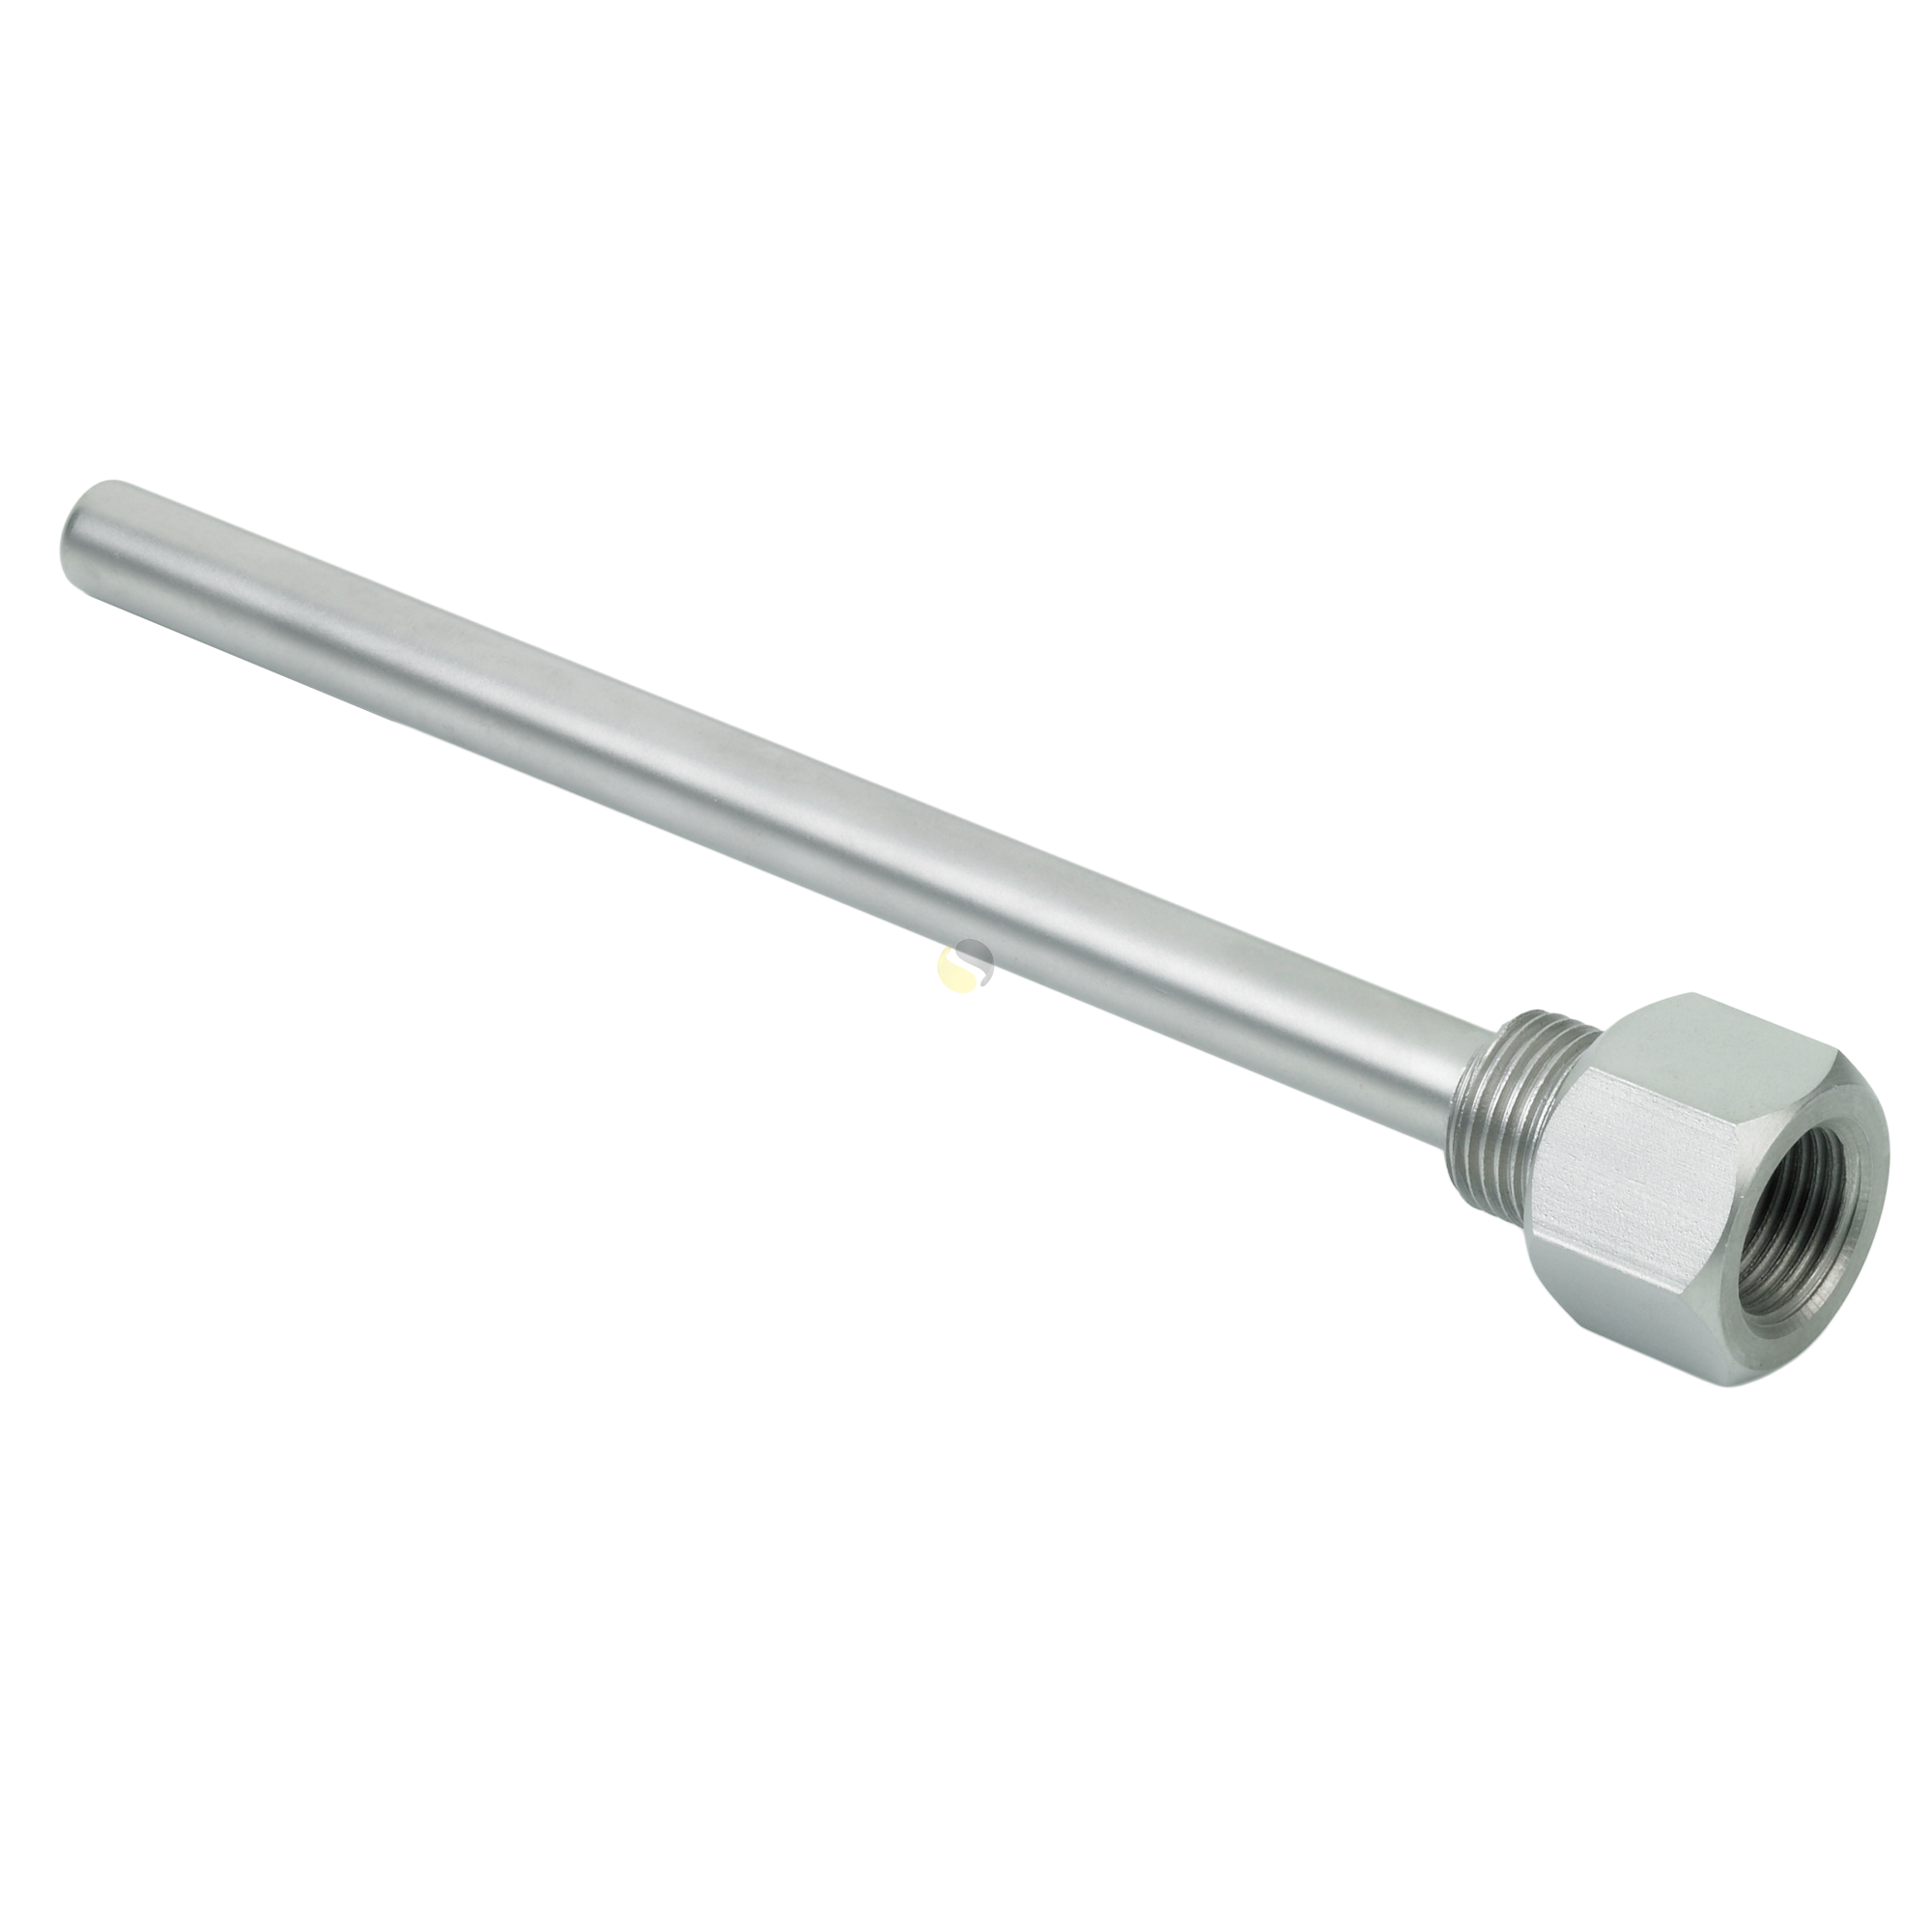 200mm weldless thermowell Stainless Steel 304 Threaded Pipe for Temperature Sensor Homebrew Immersion Well 30 50 100 200 300 400 500mm 1/4 inch 